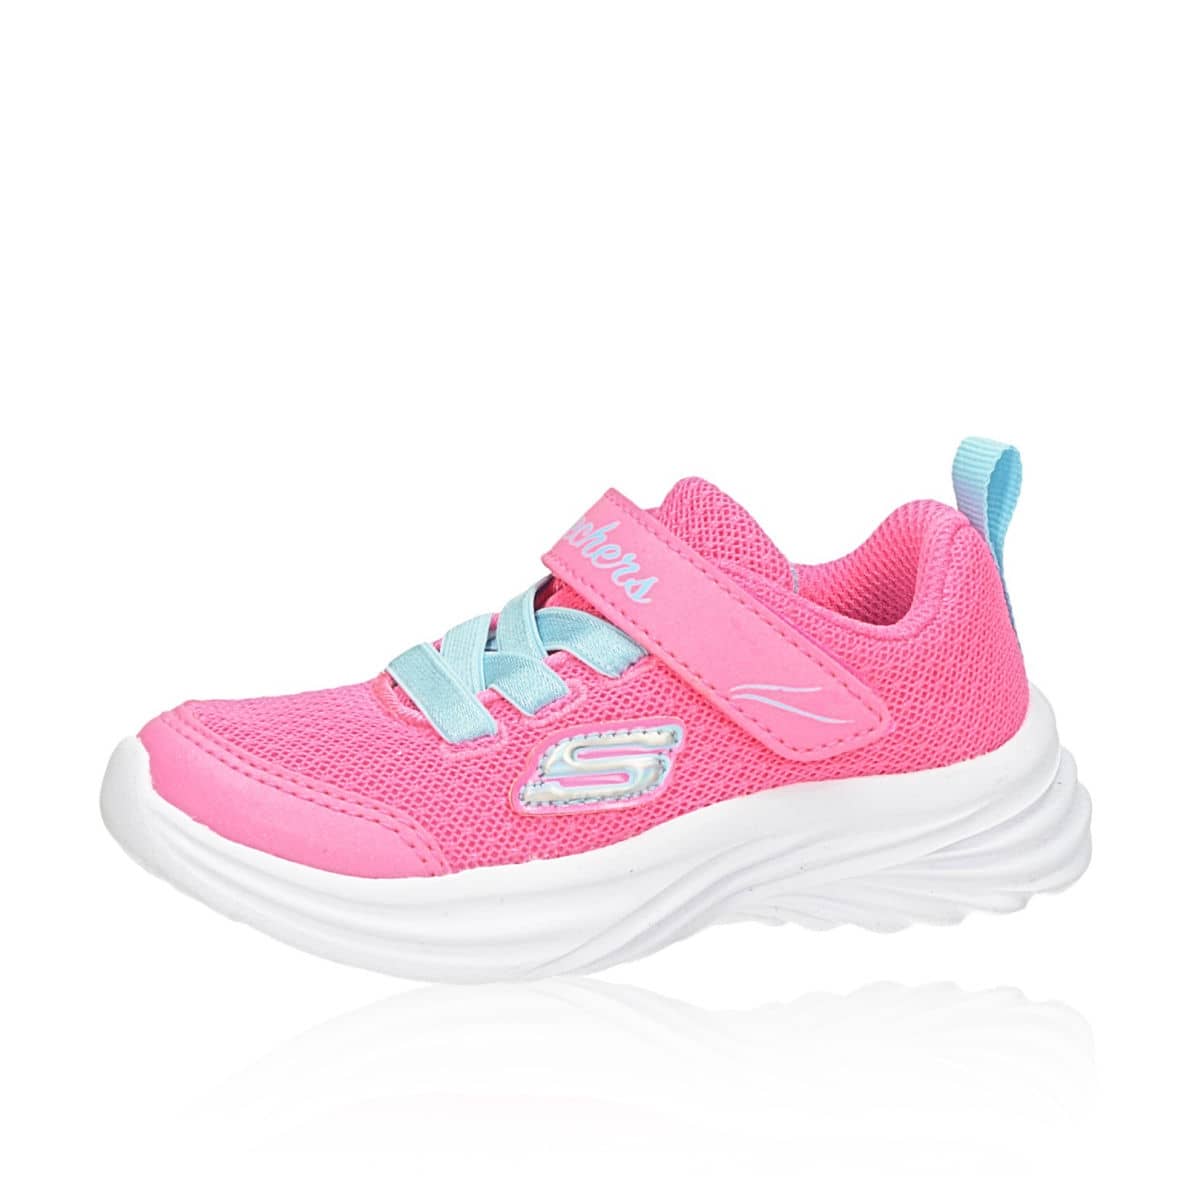 stylish trainers - pink Robel.shoes